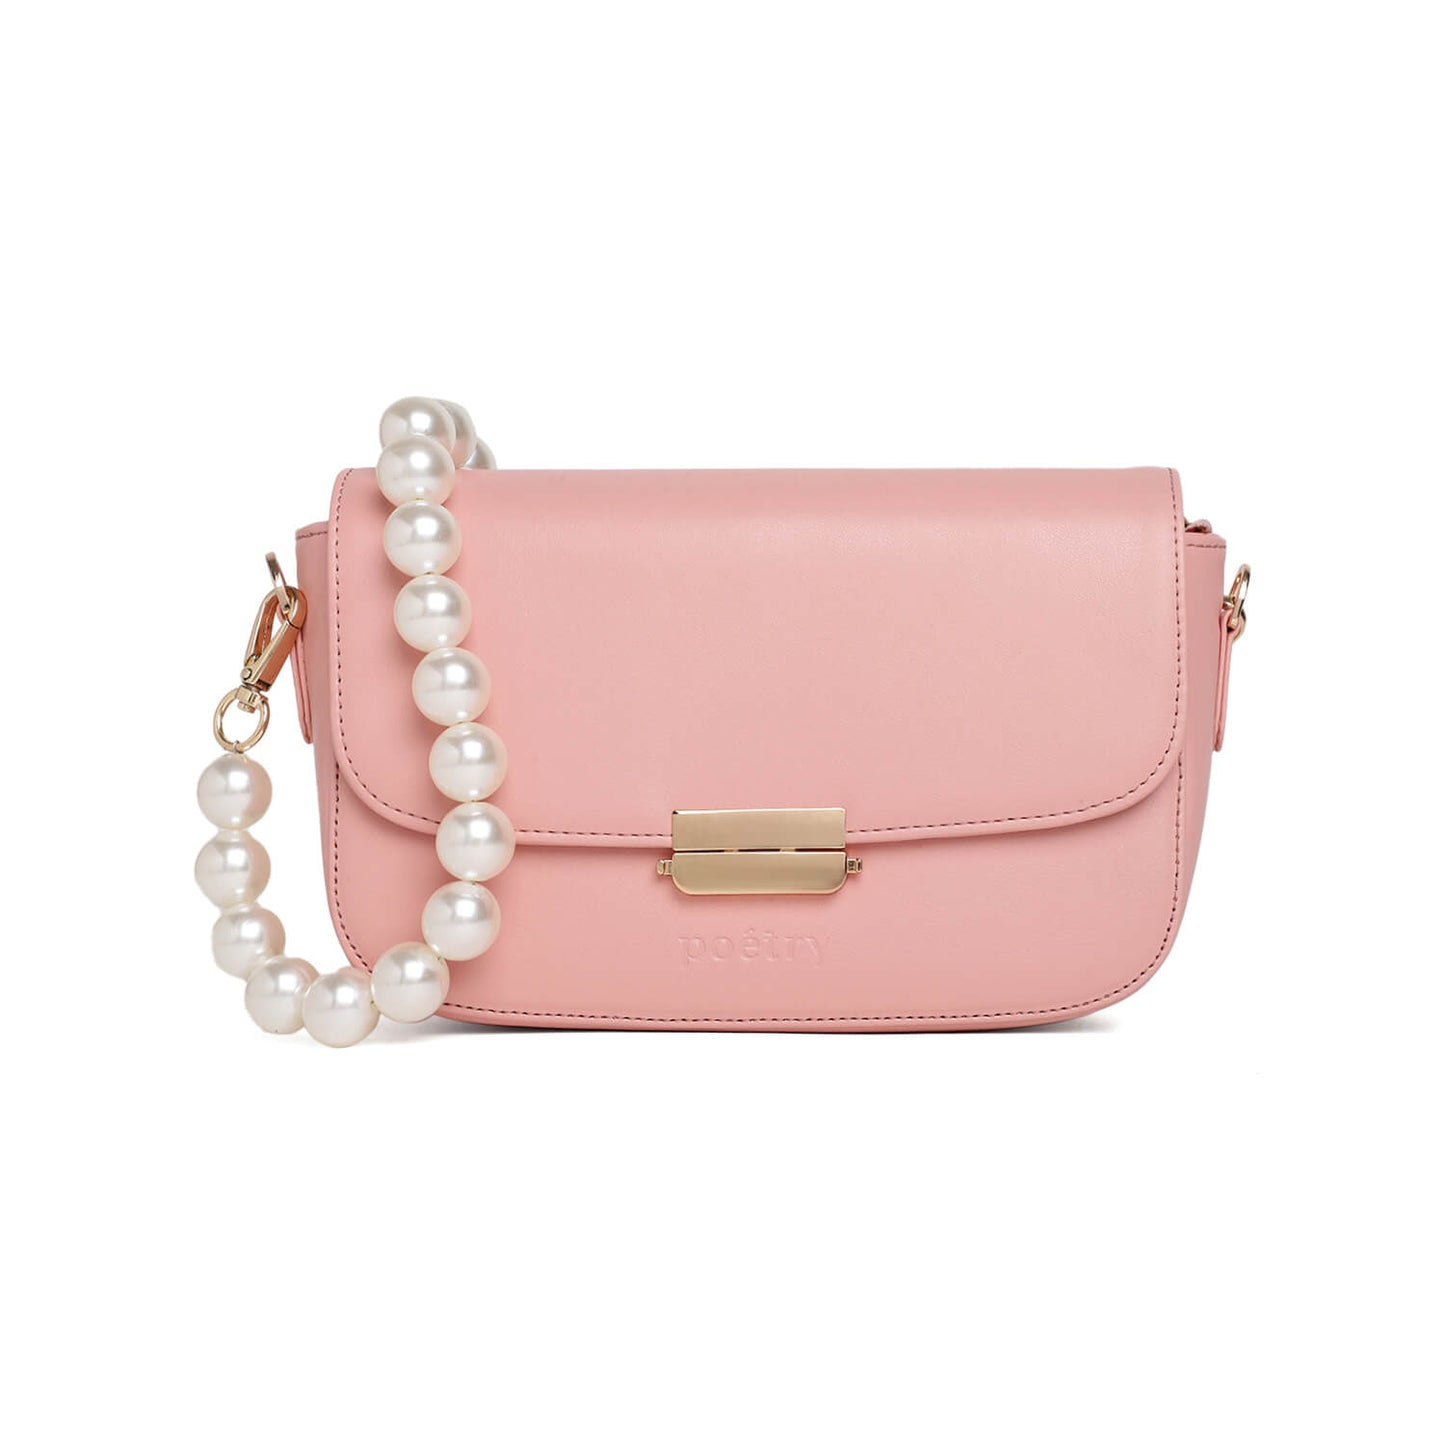 Poetry Pearly Blush shoulder bag